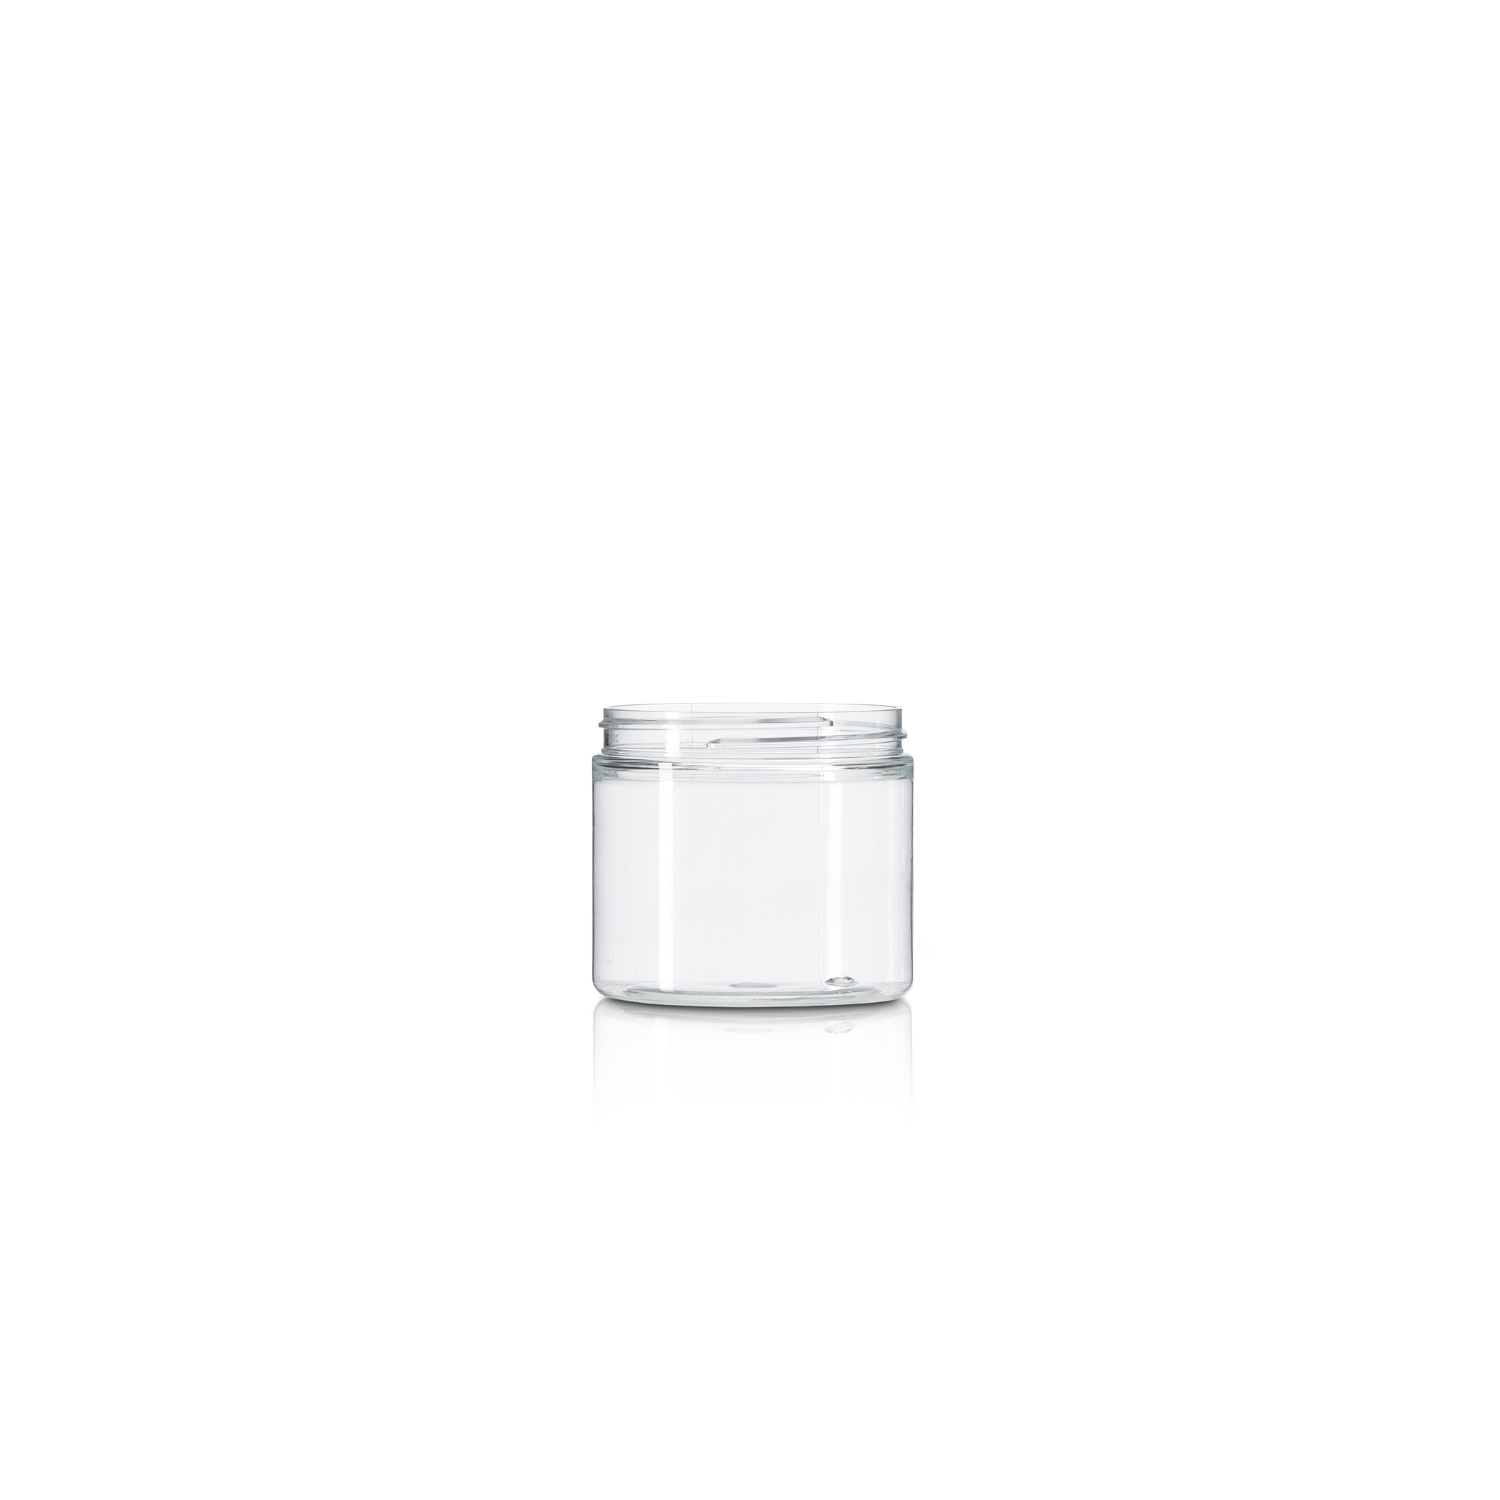 200ml Clear PET Straight-Sided Jar - 70/400 neck